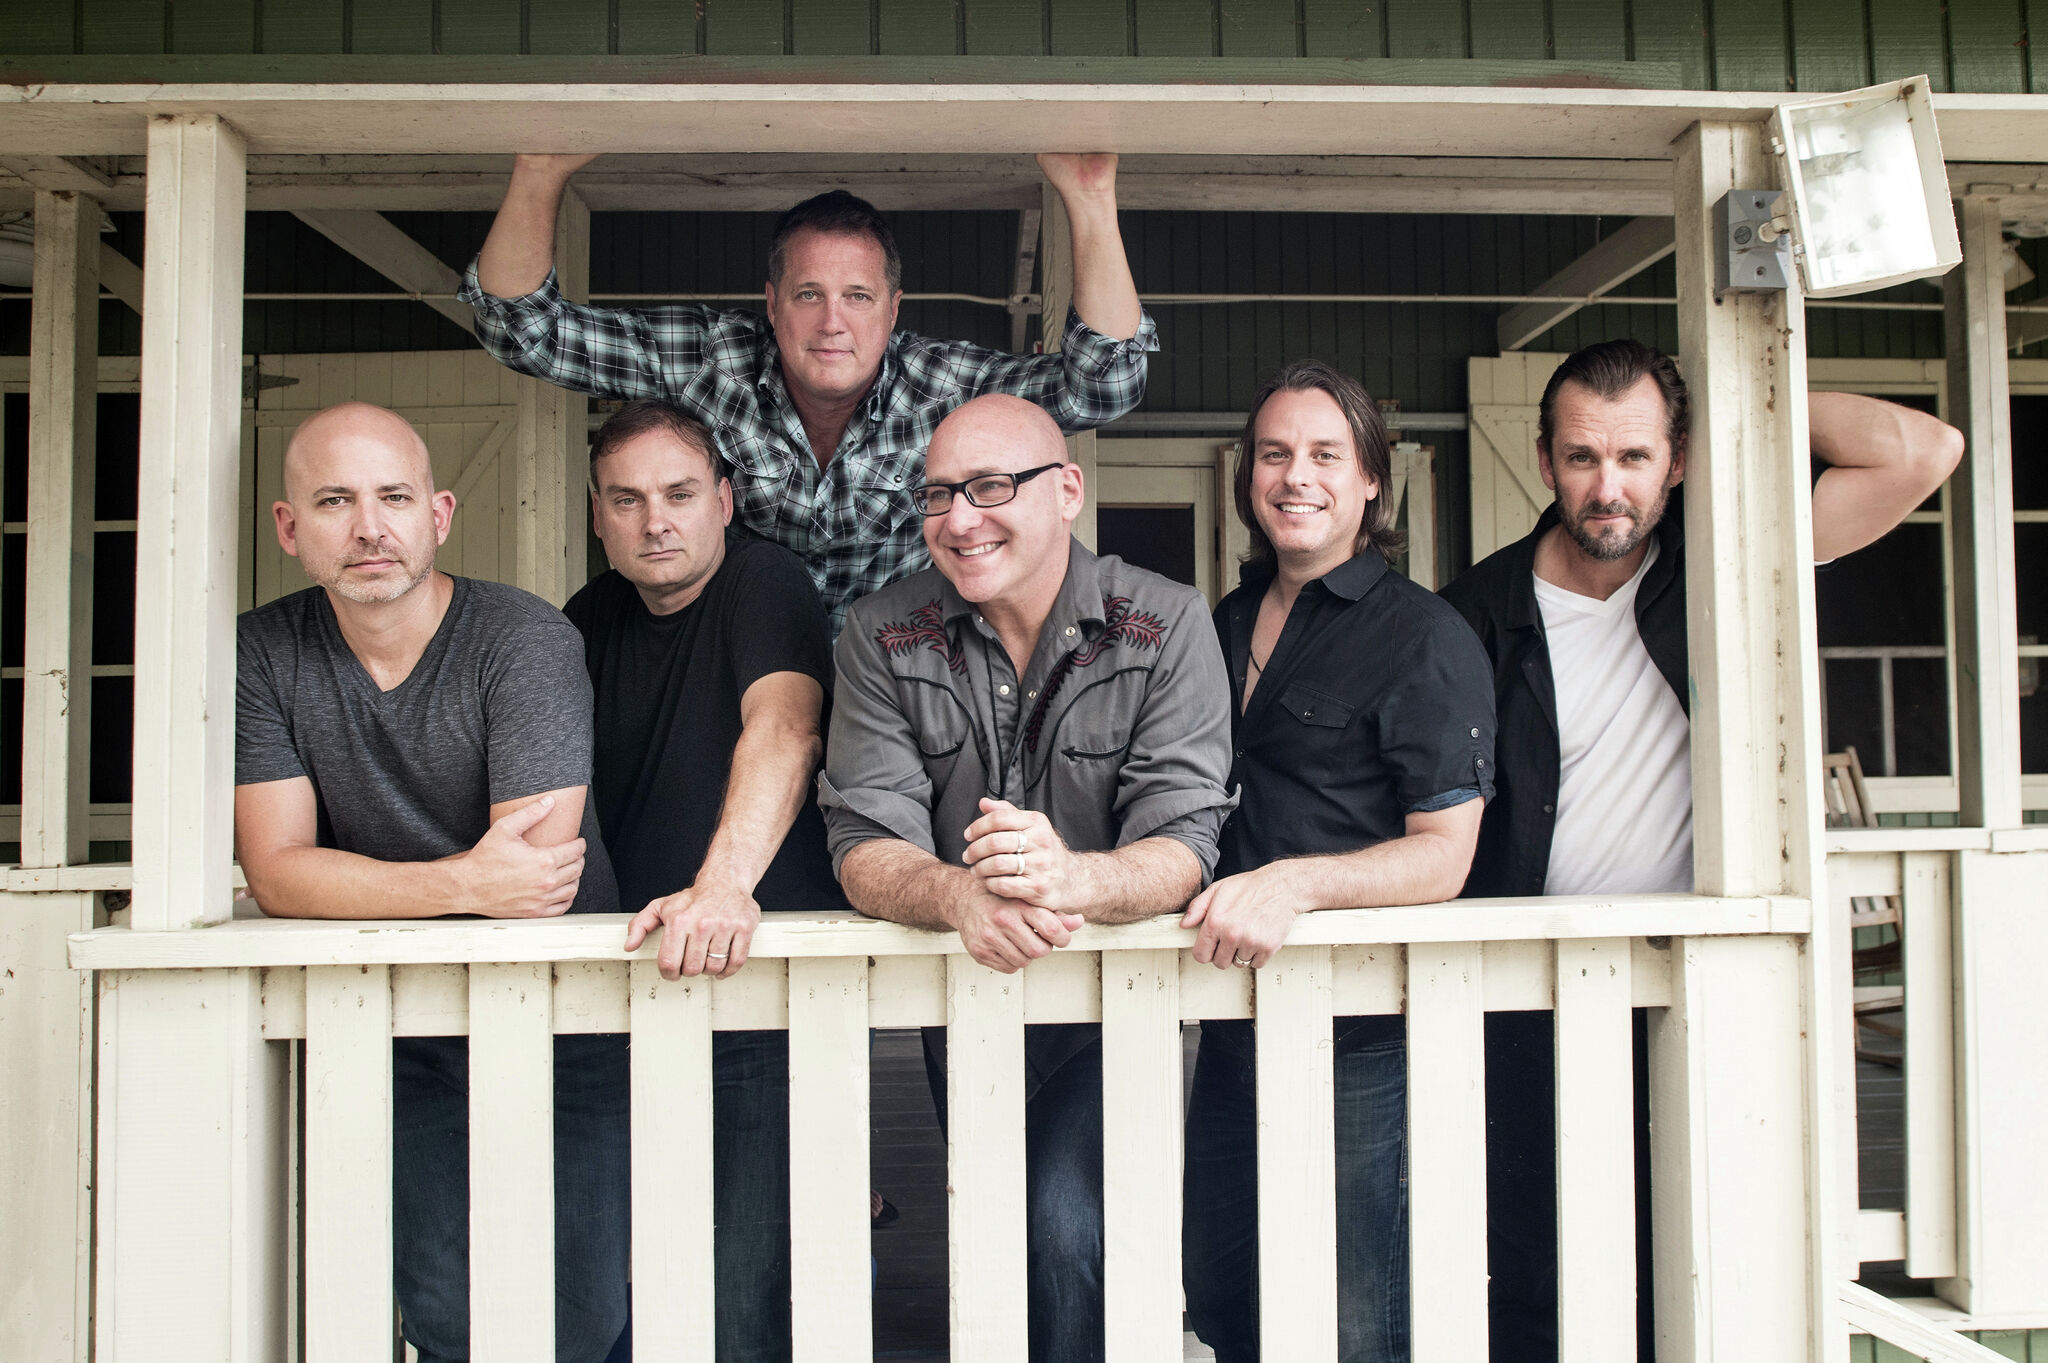 Band Sister Hazel to play April 6 at Wildey Theatre in Edwardsville